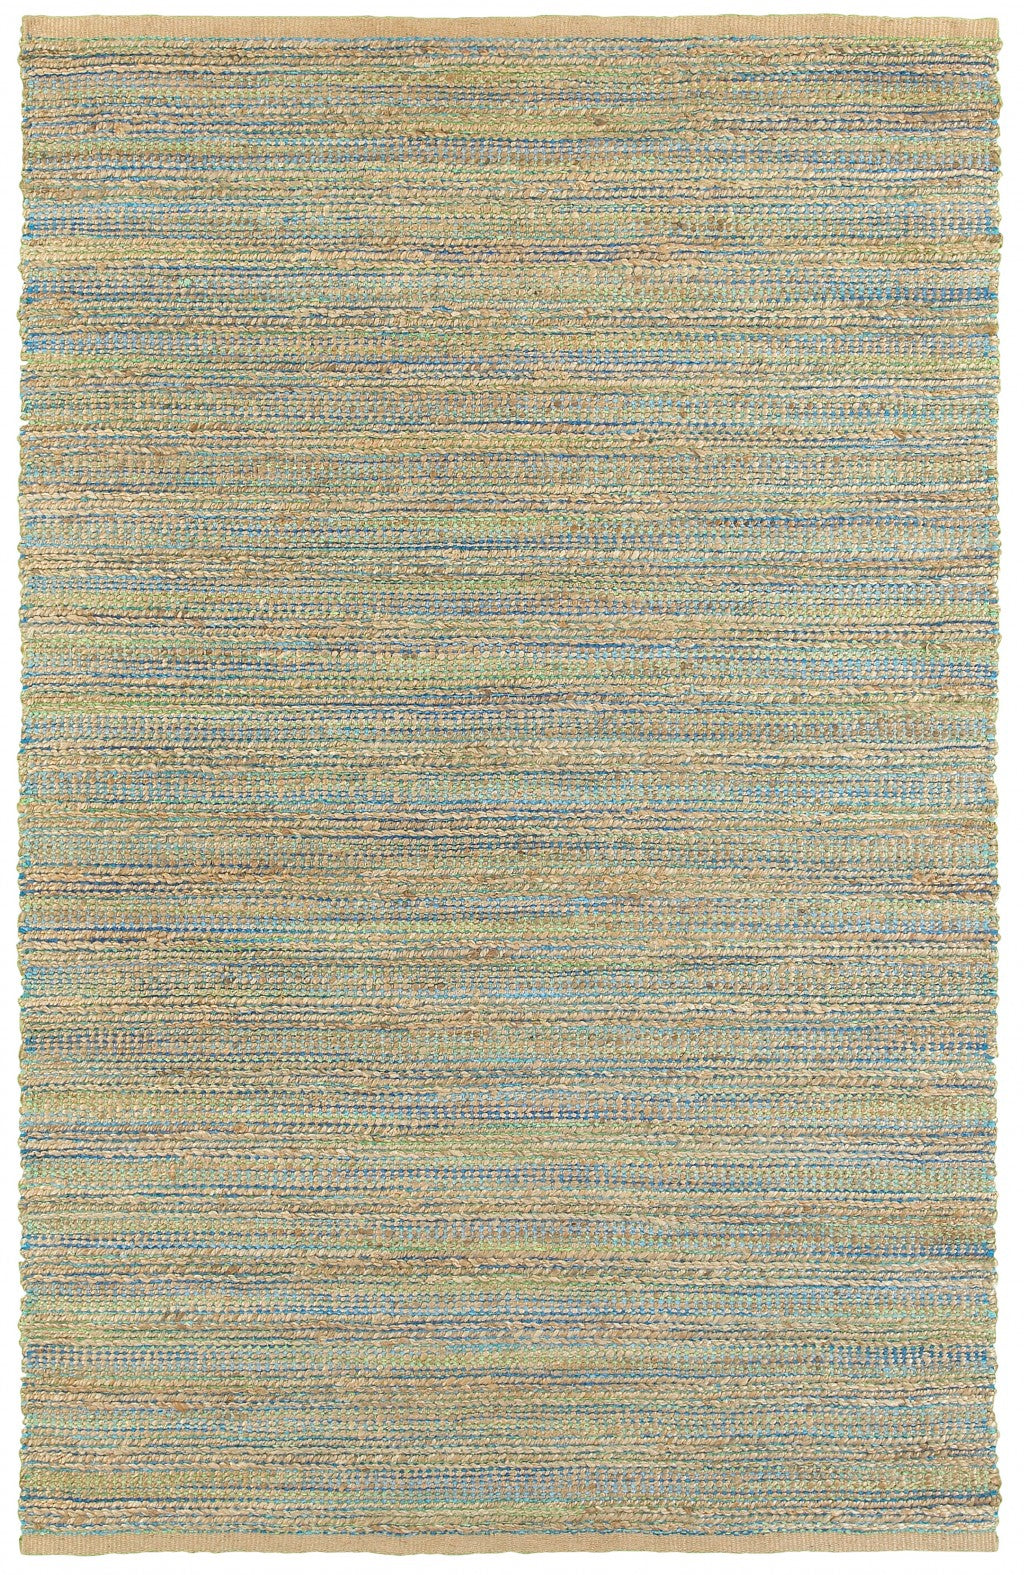 9' x 12' Natural Hand Woven Area Rug